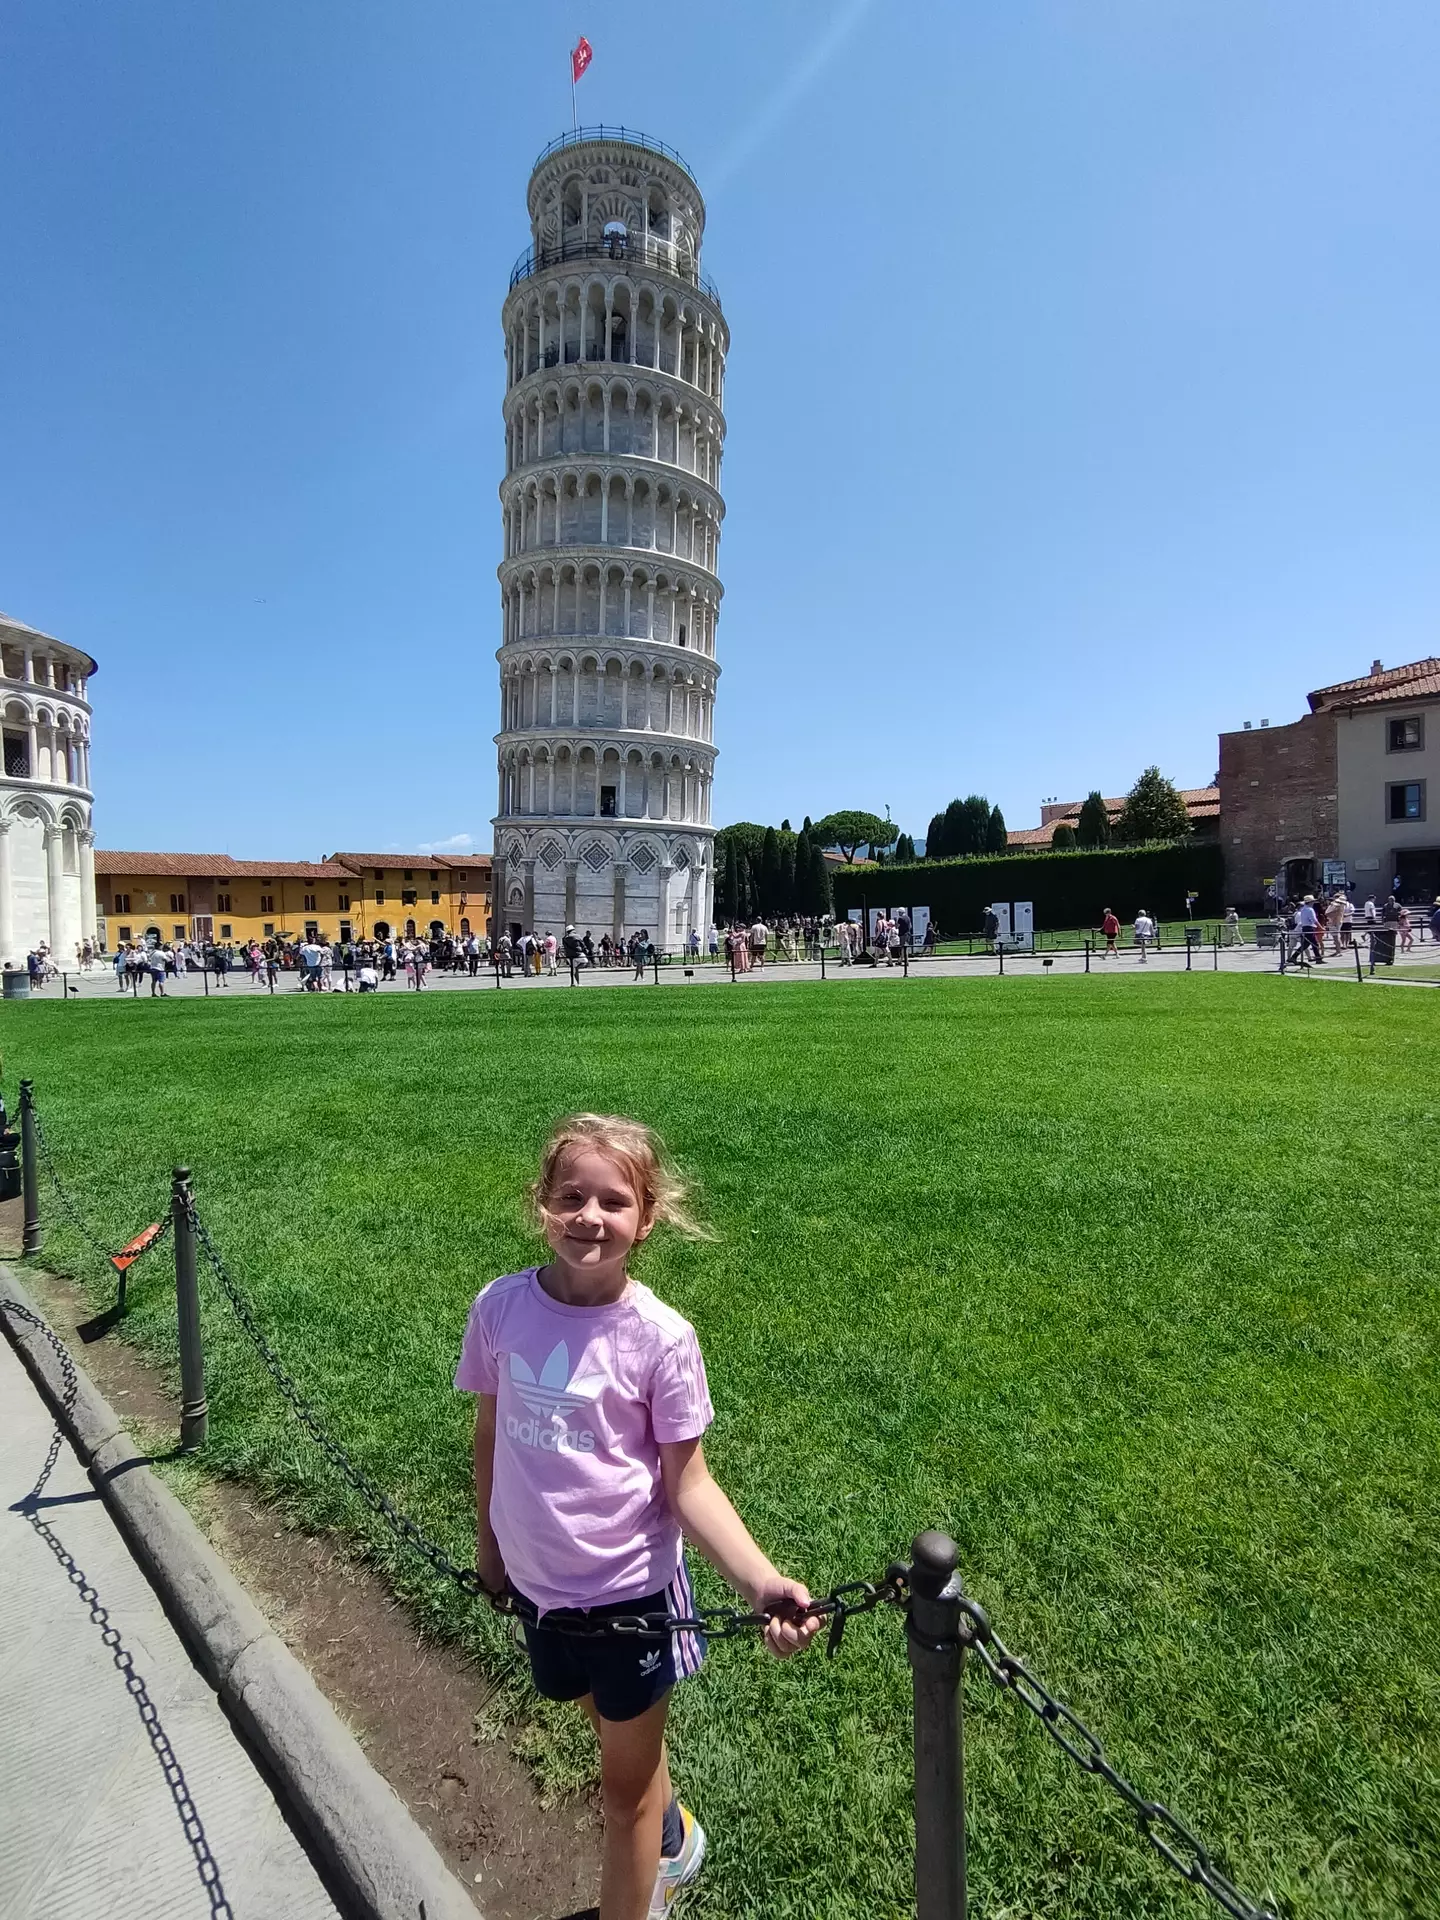 They visited the Leaning Tower of Pisa.